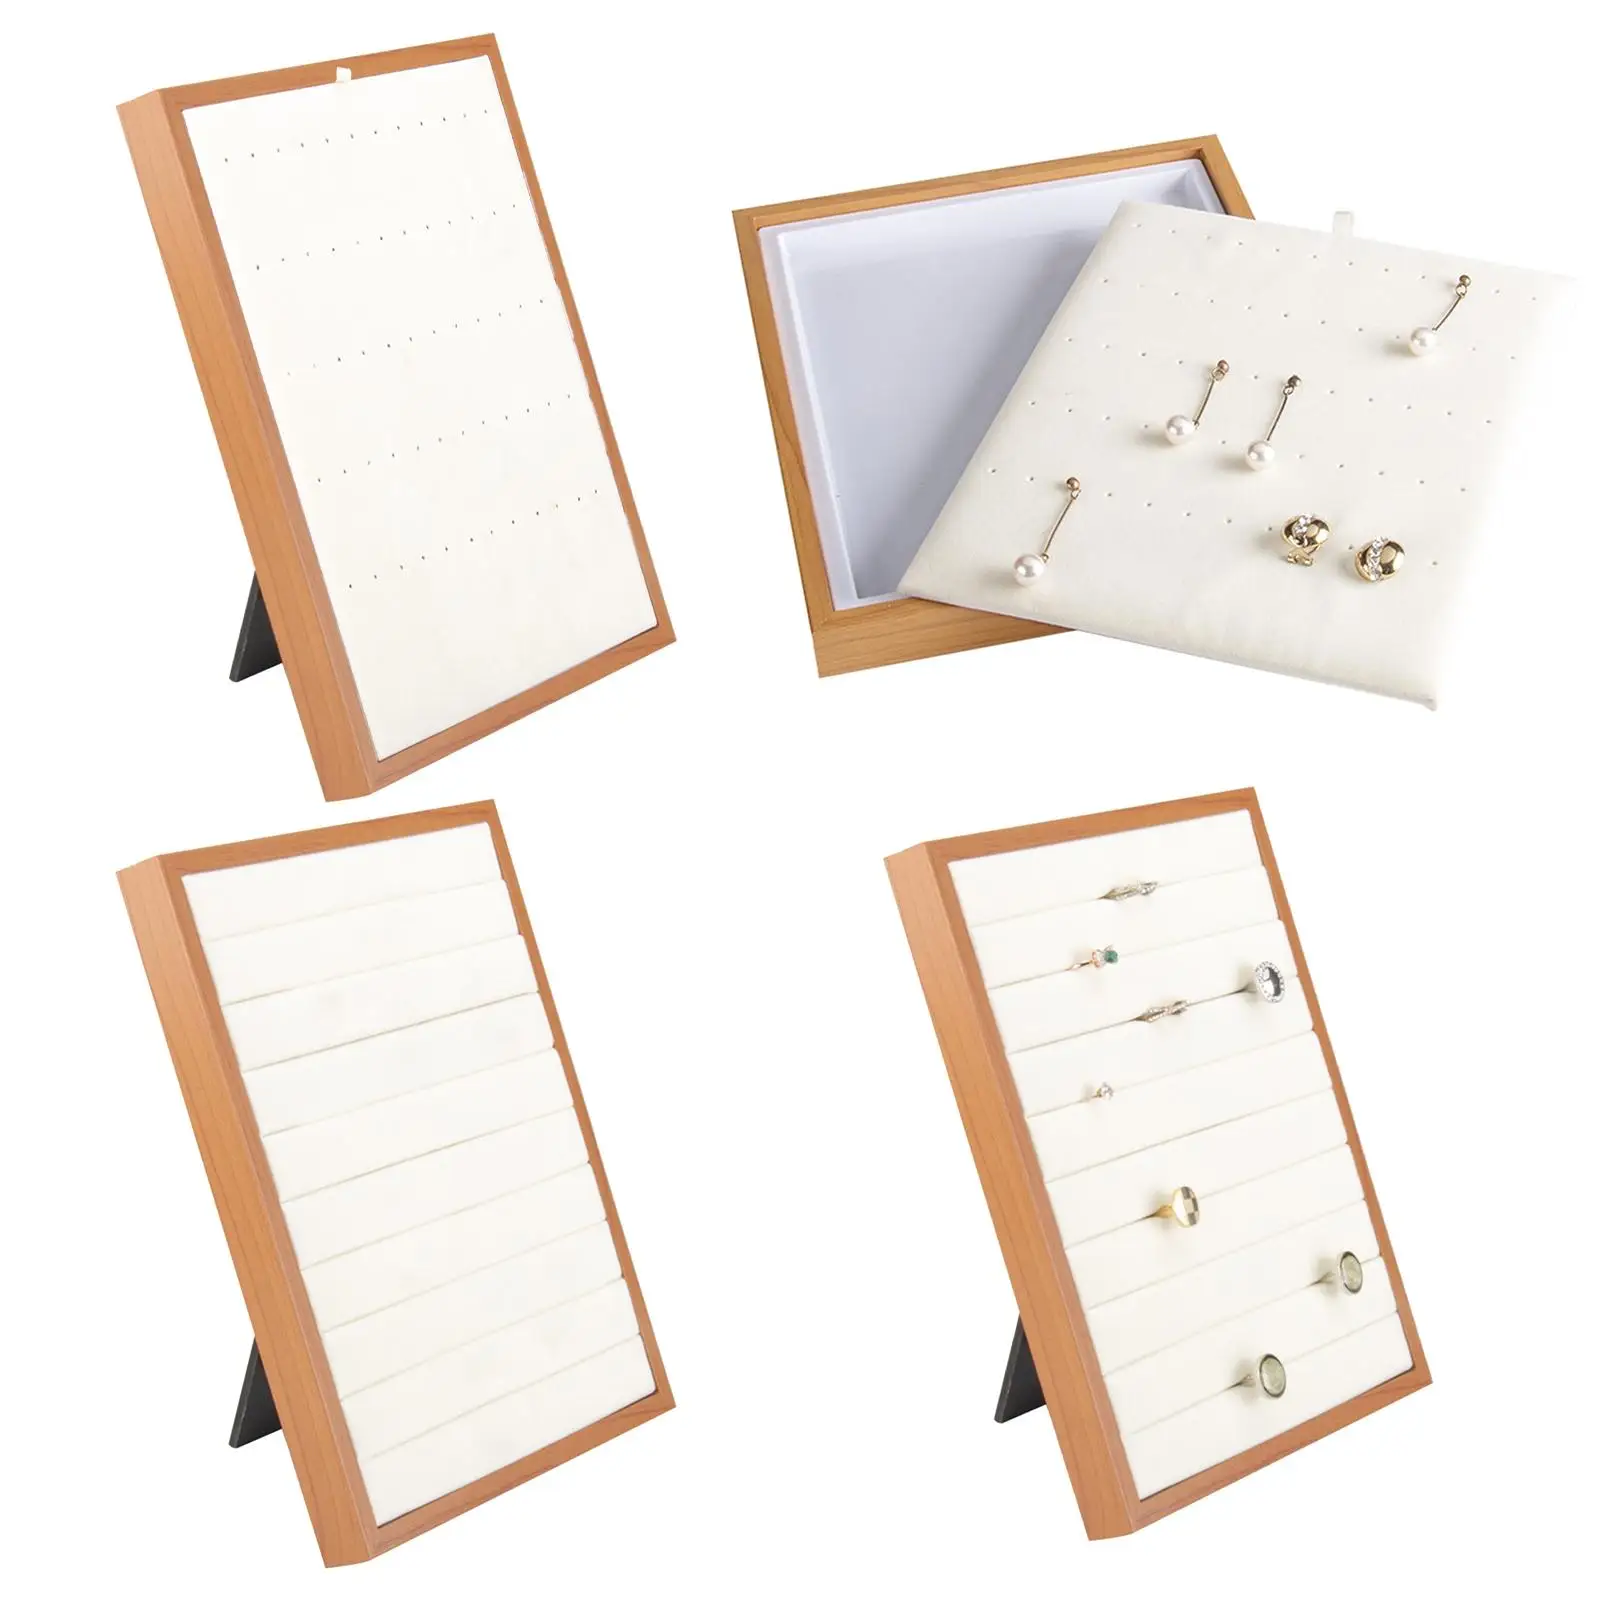 Wooden Jewelry Display Boards Showing  for Shop Showcase Home